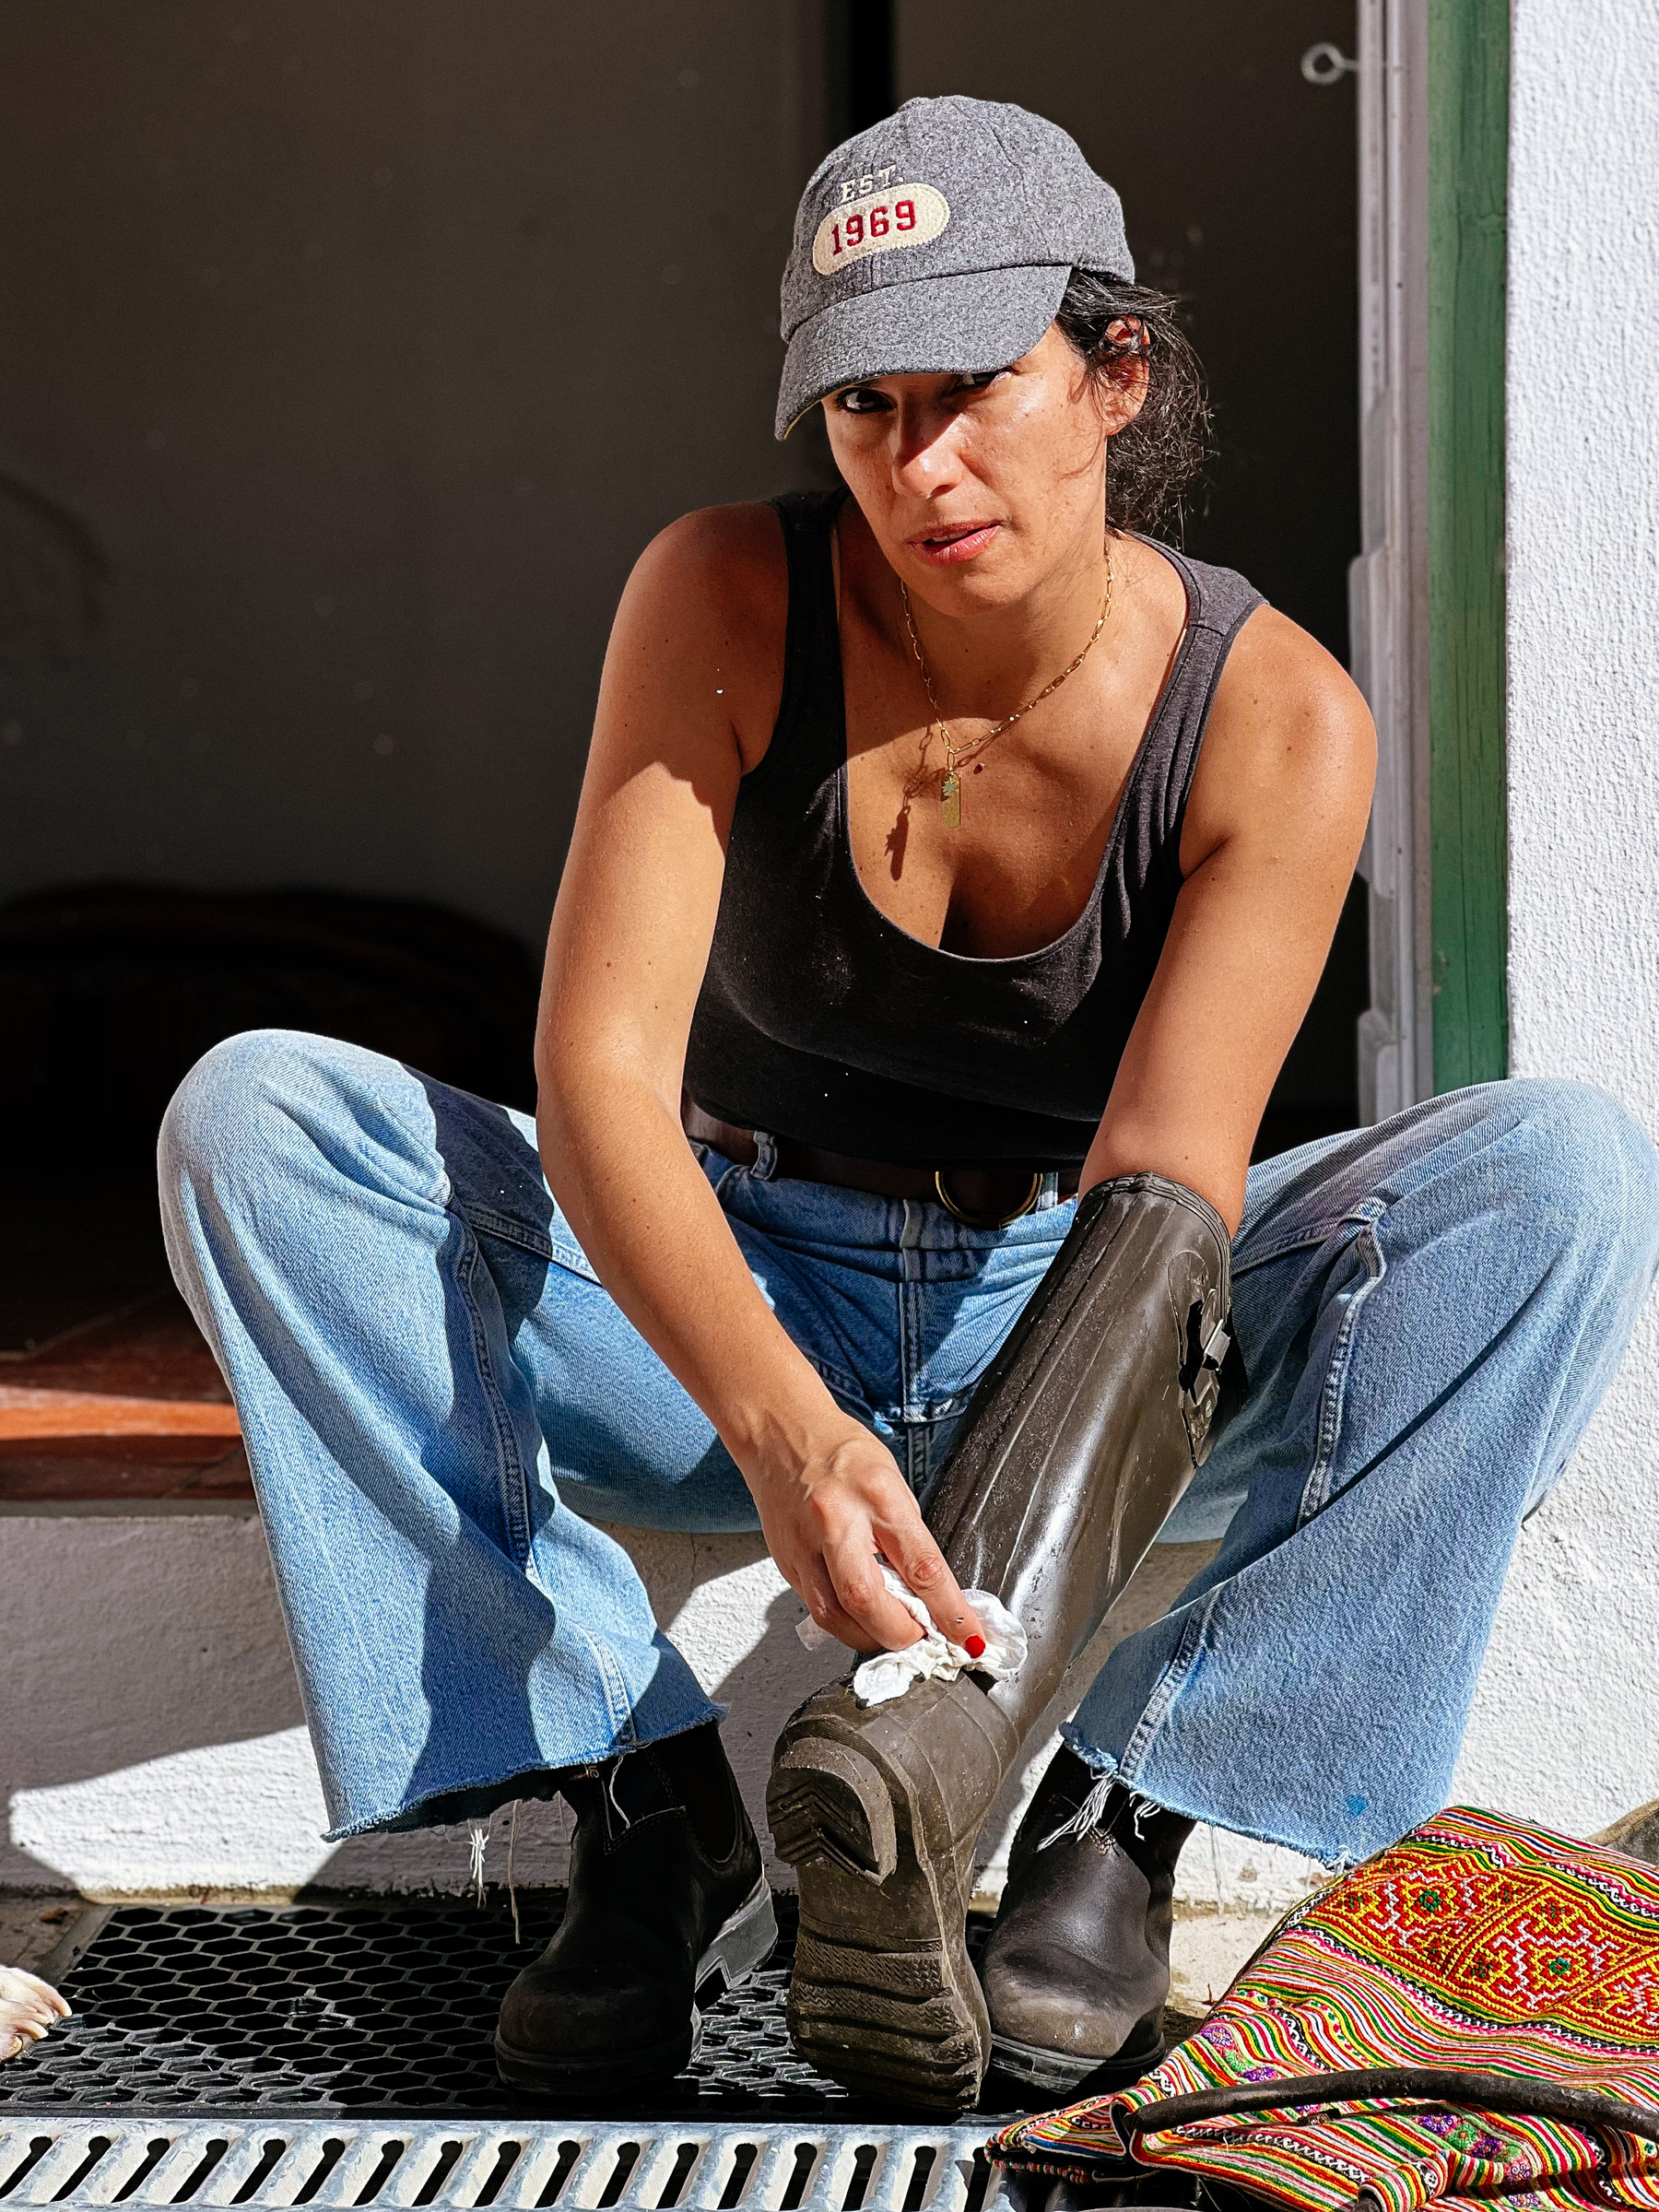 A woman cleans a boot, wearing a cap. Looking serious. 